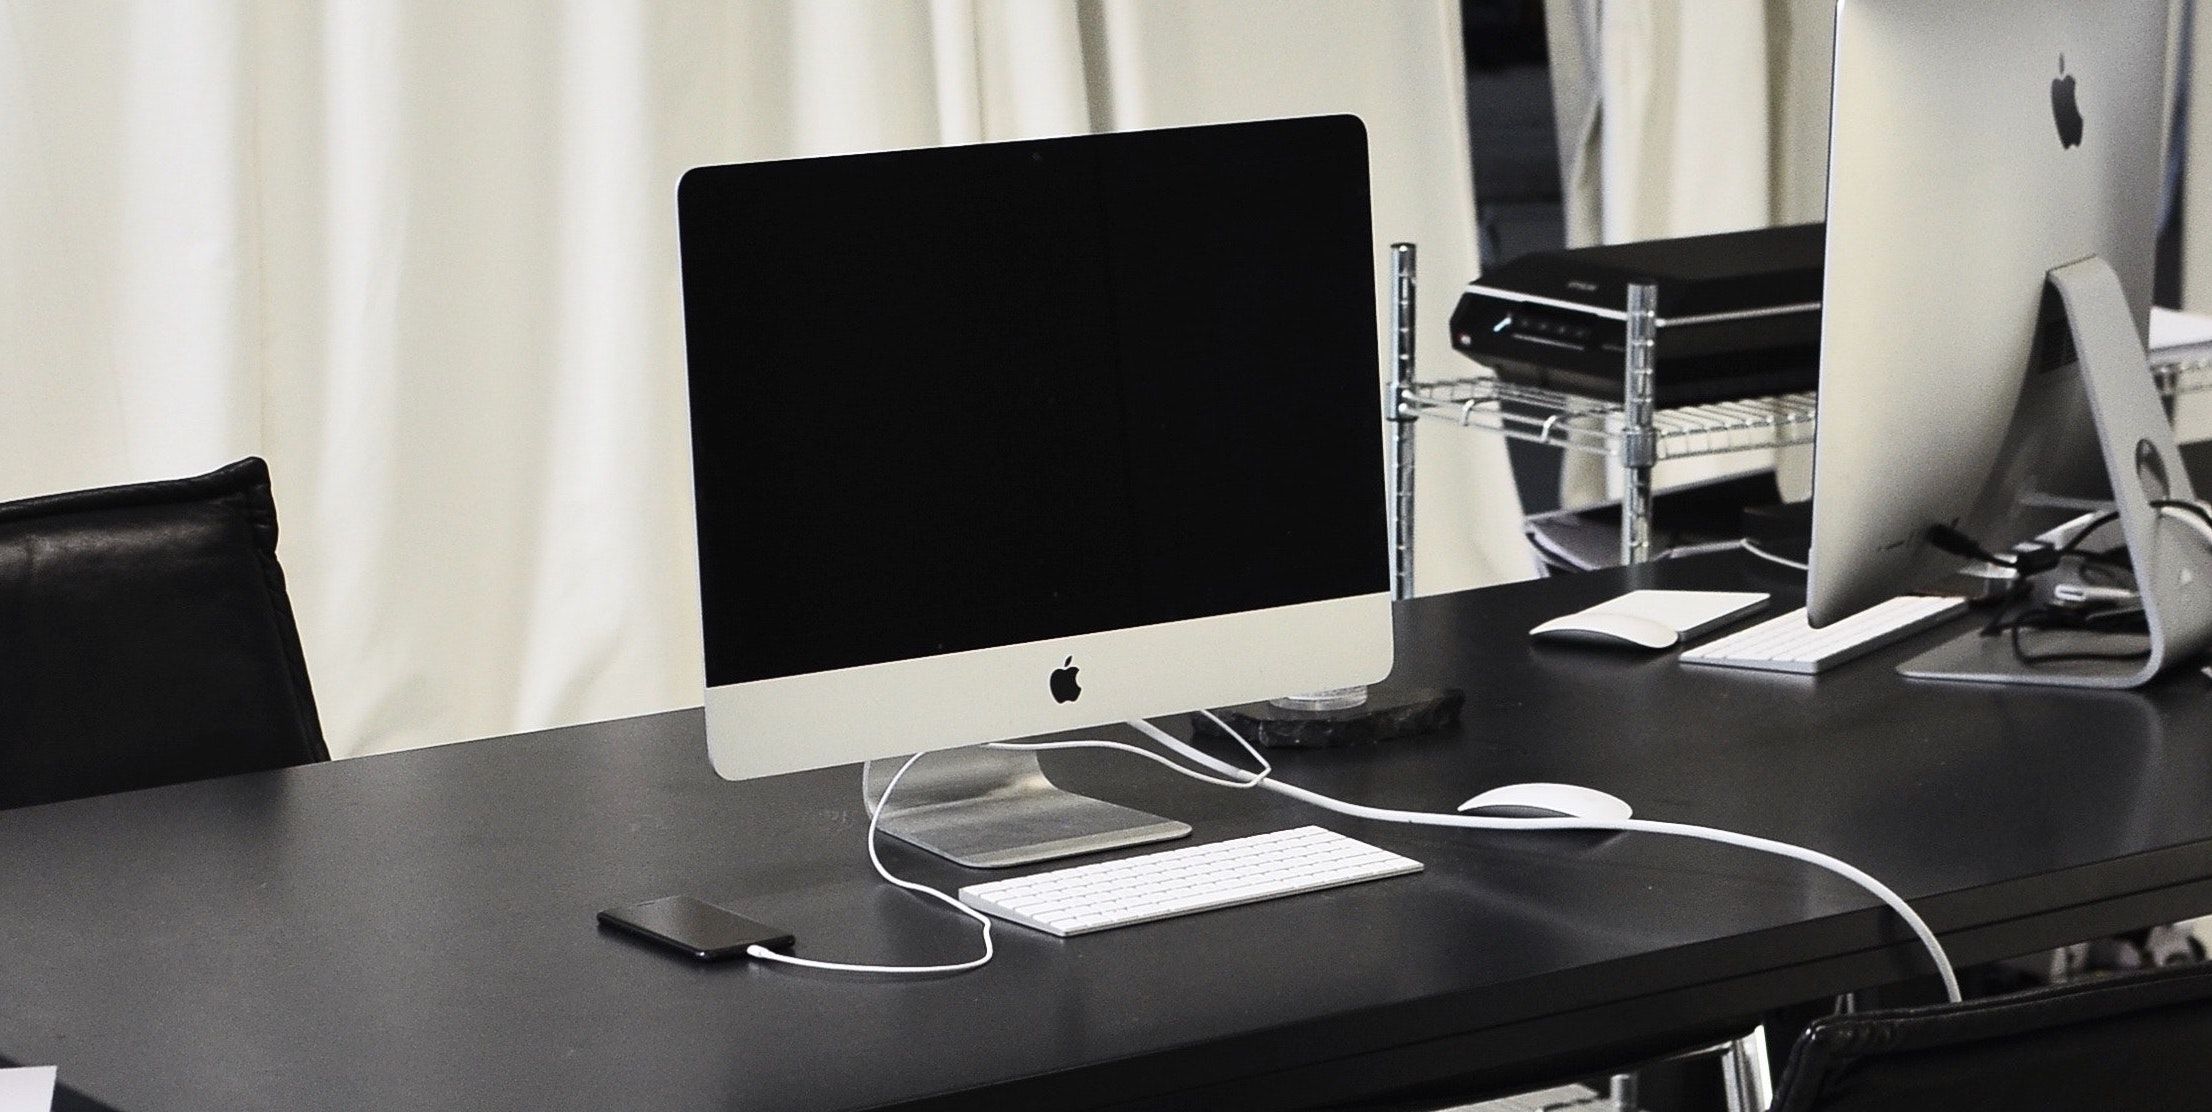 An iPhone charges beside an iMac on a desk